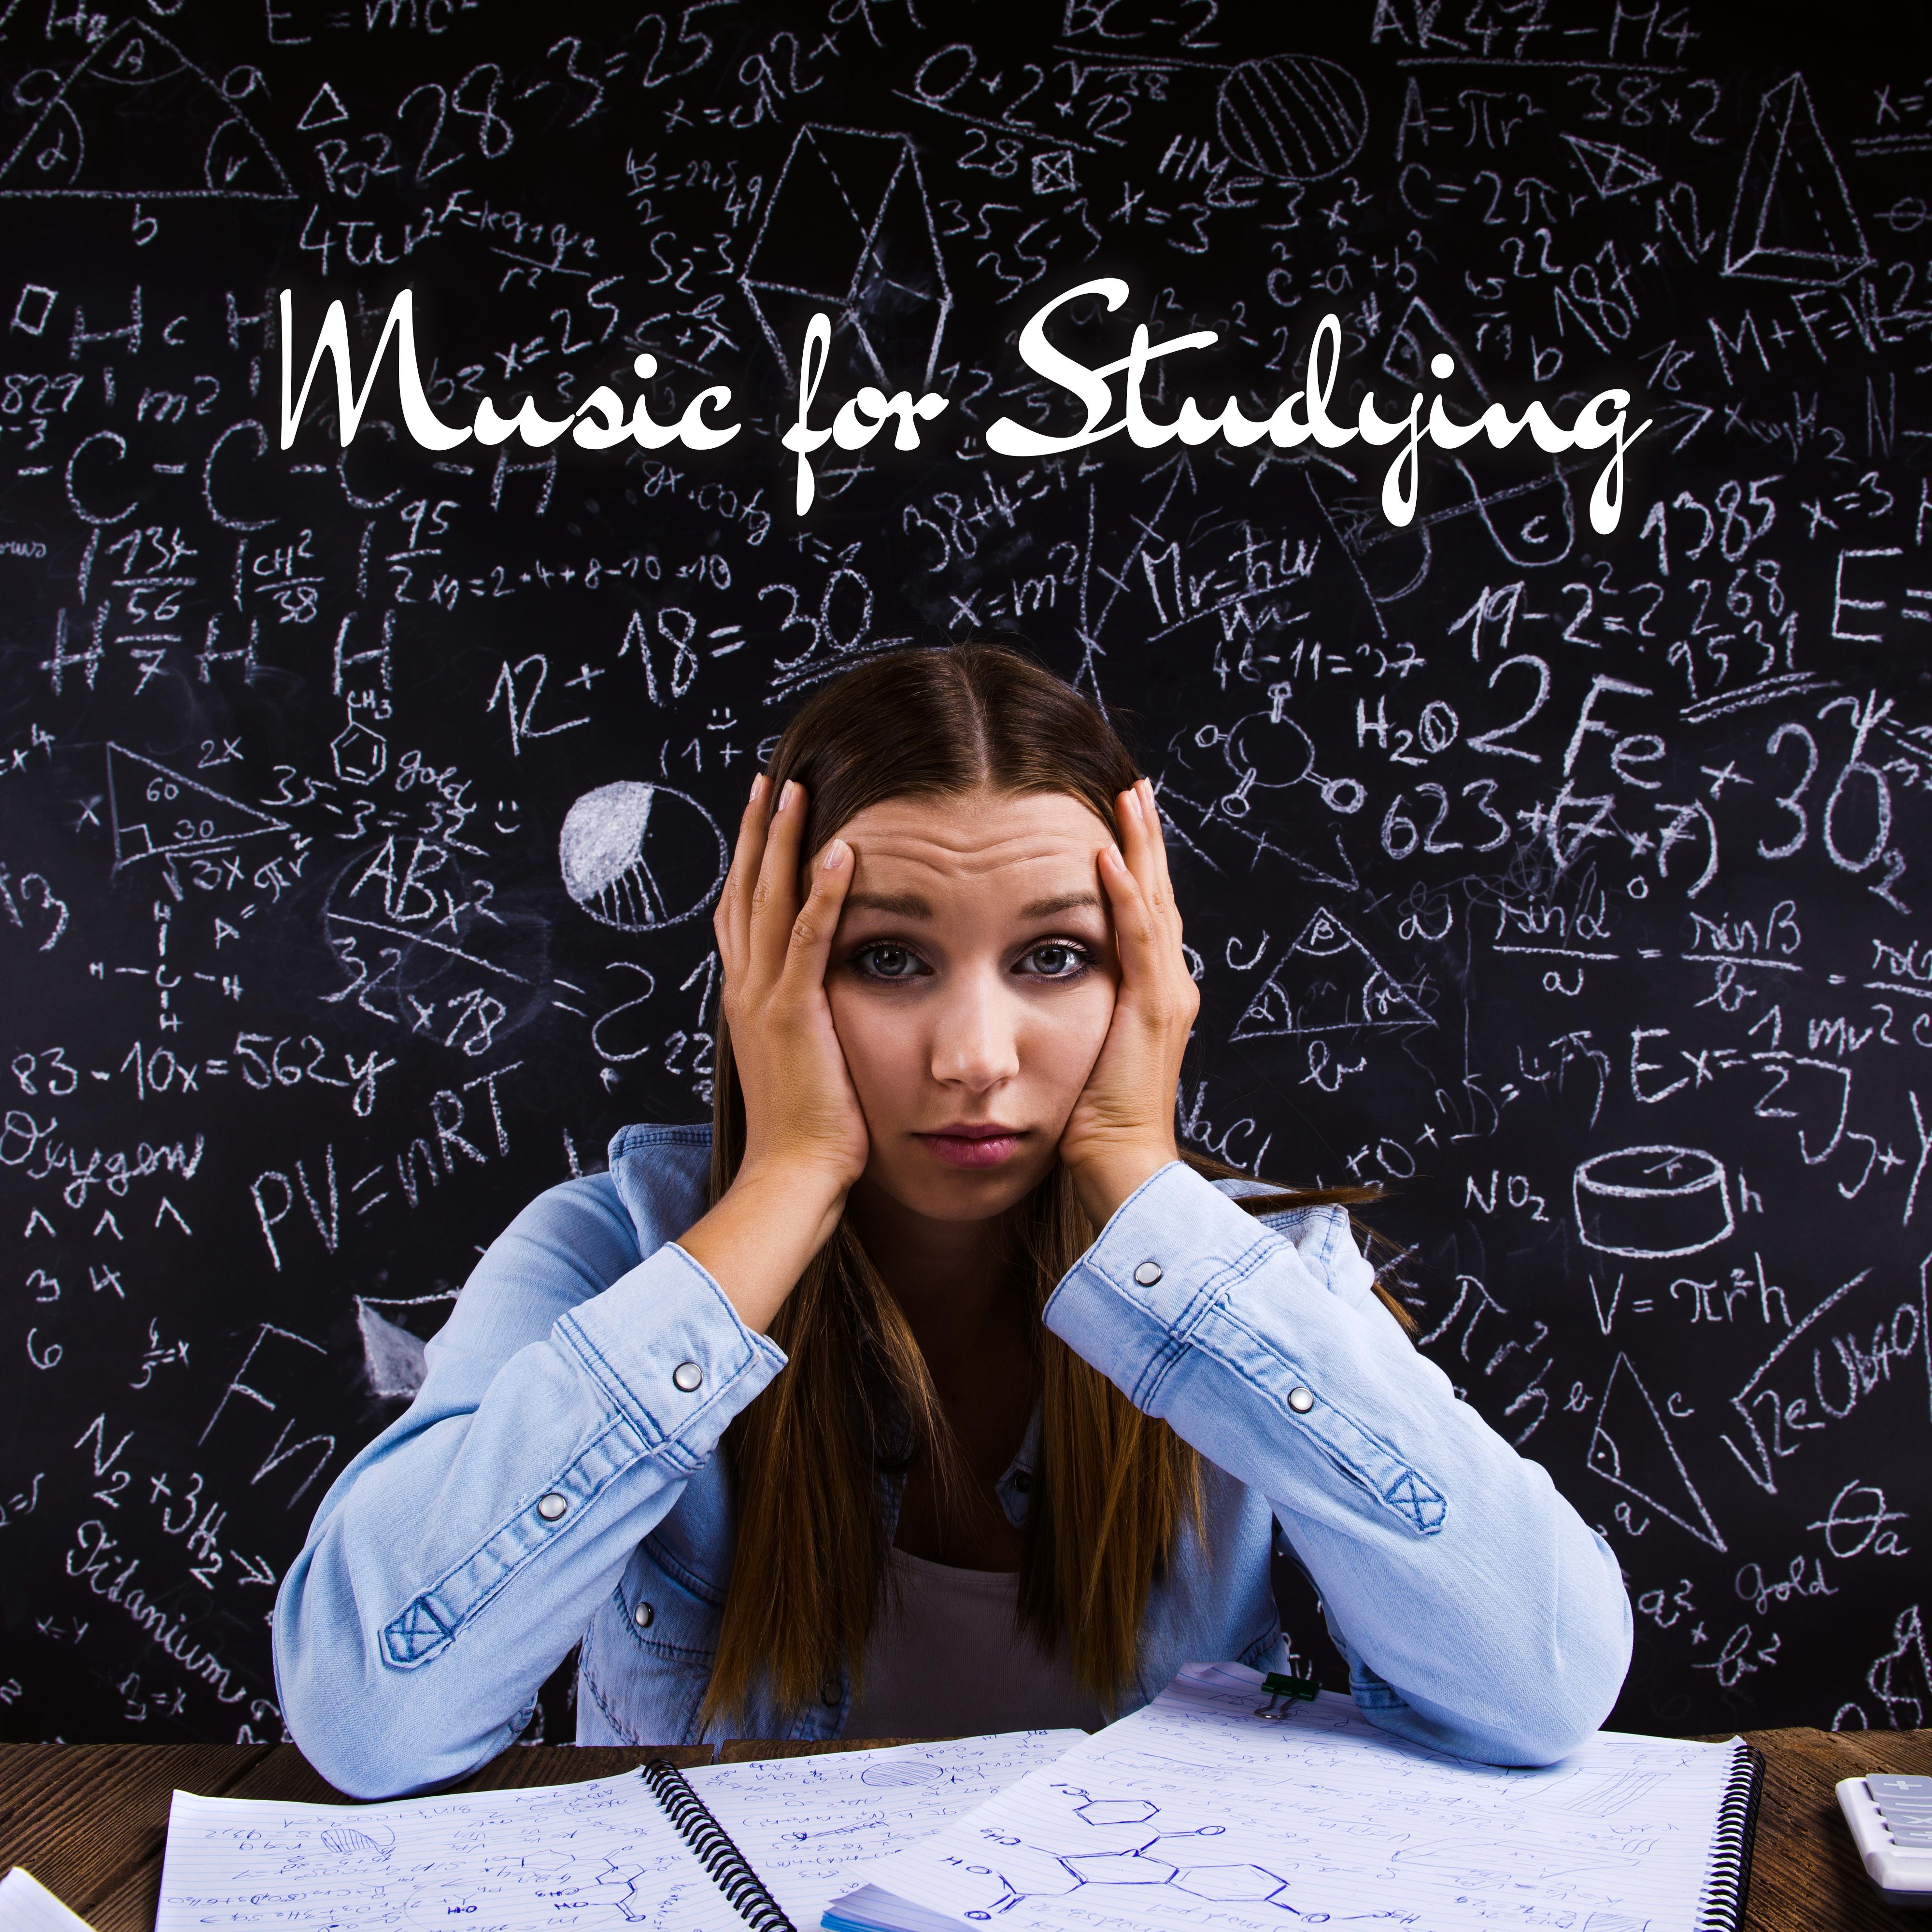 Music for Studying – Full Concentration, Stress Relief, Ambient Study Music, Deep Relaxation, Calm Down